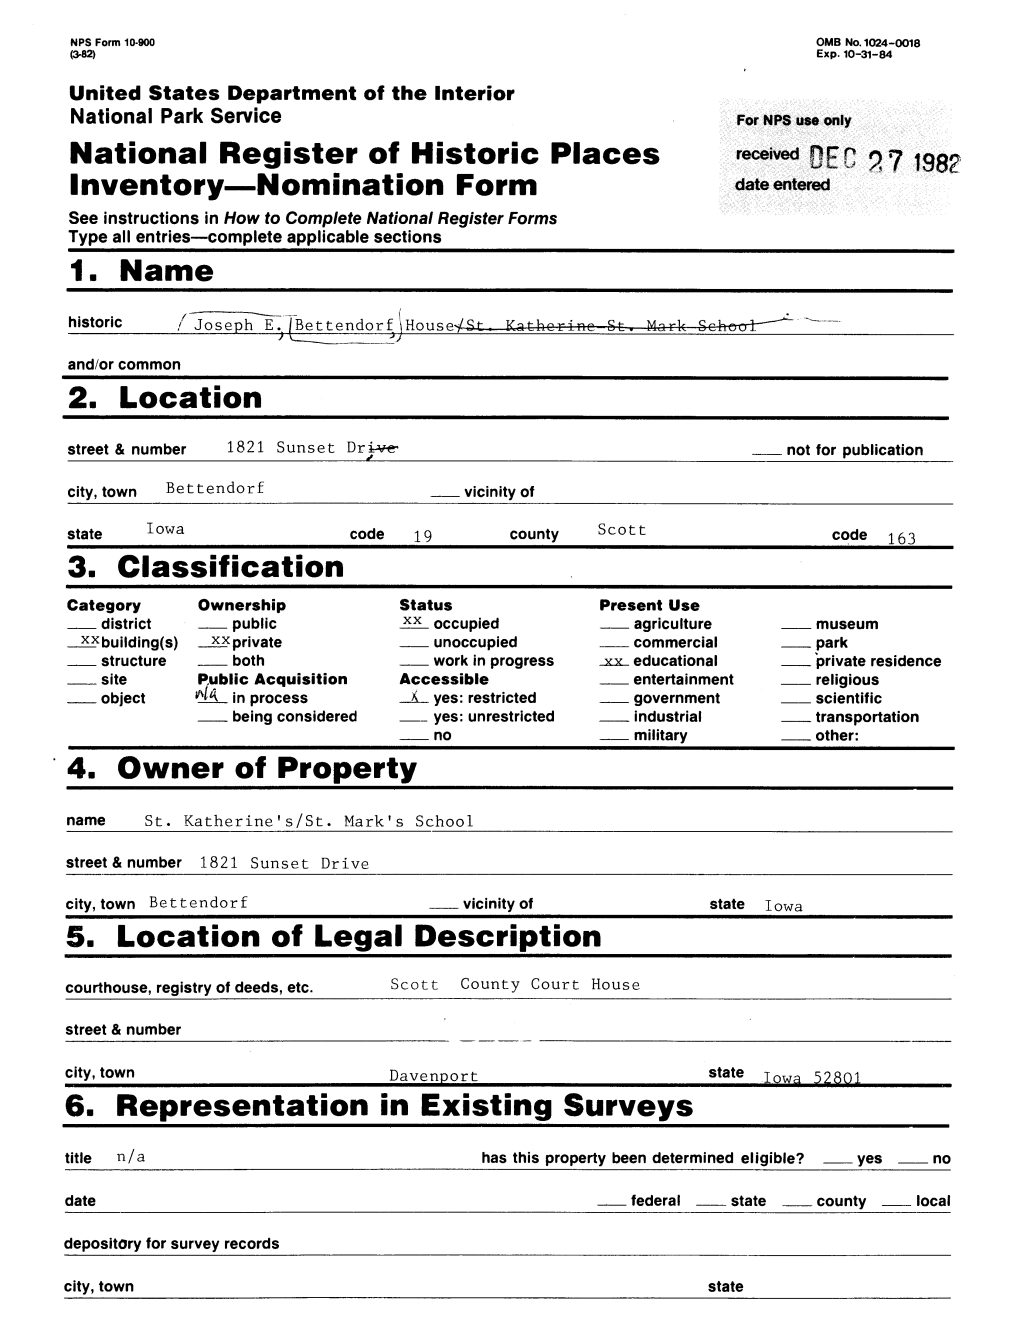 National Register of Historic Places Inventory — Nomination Form 1